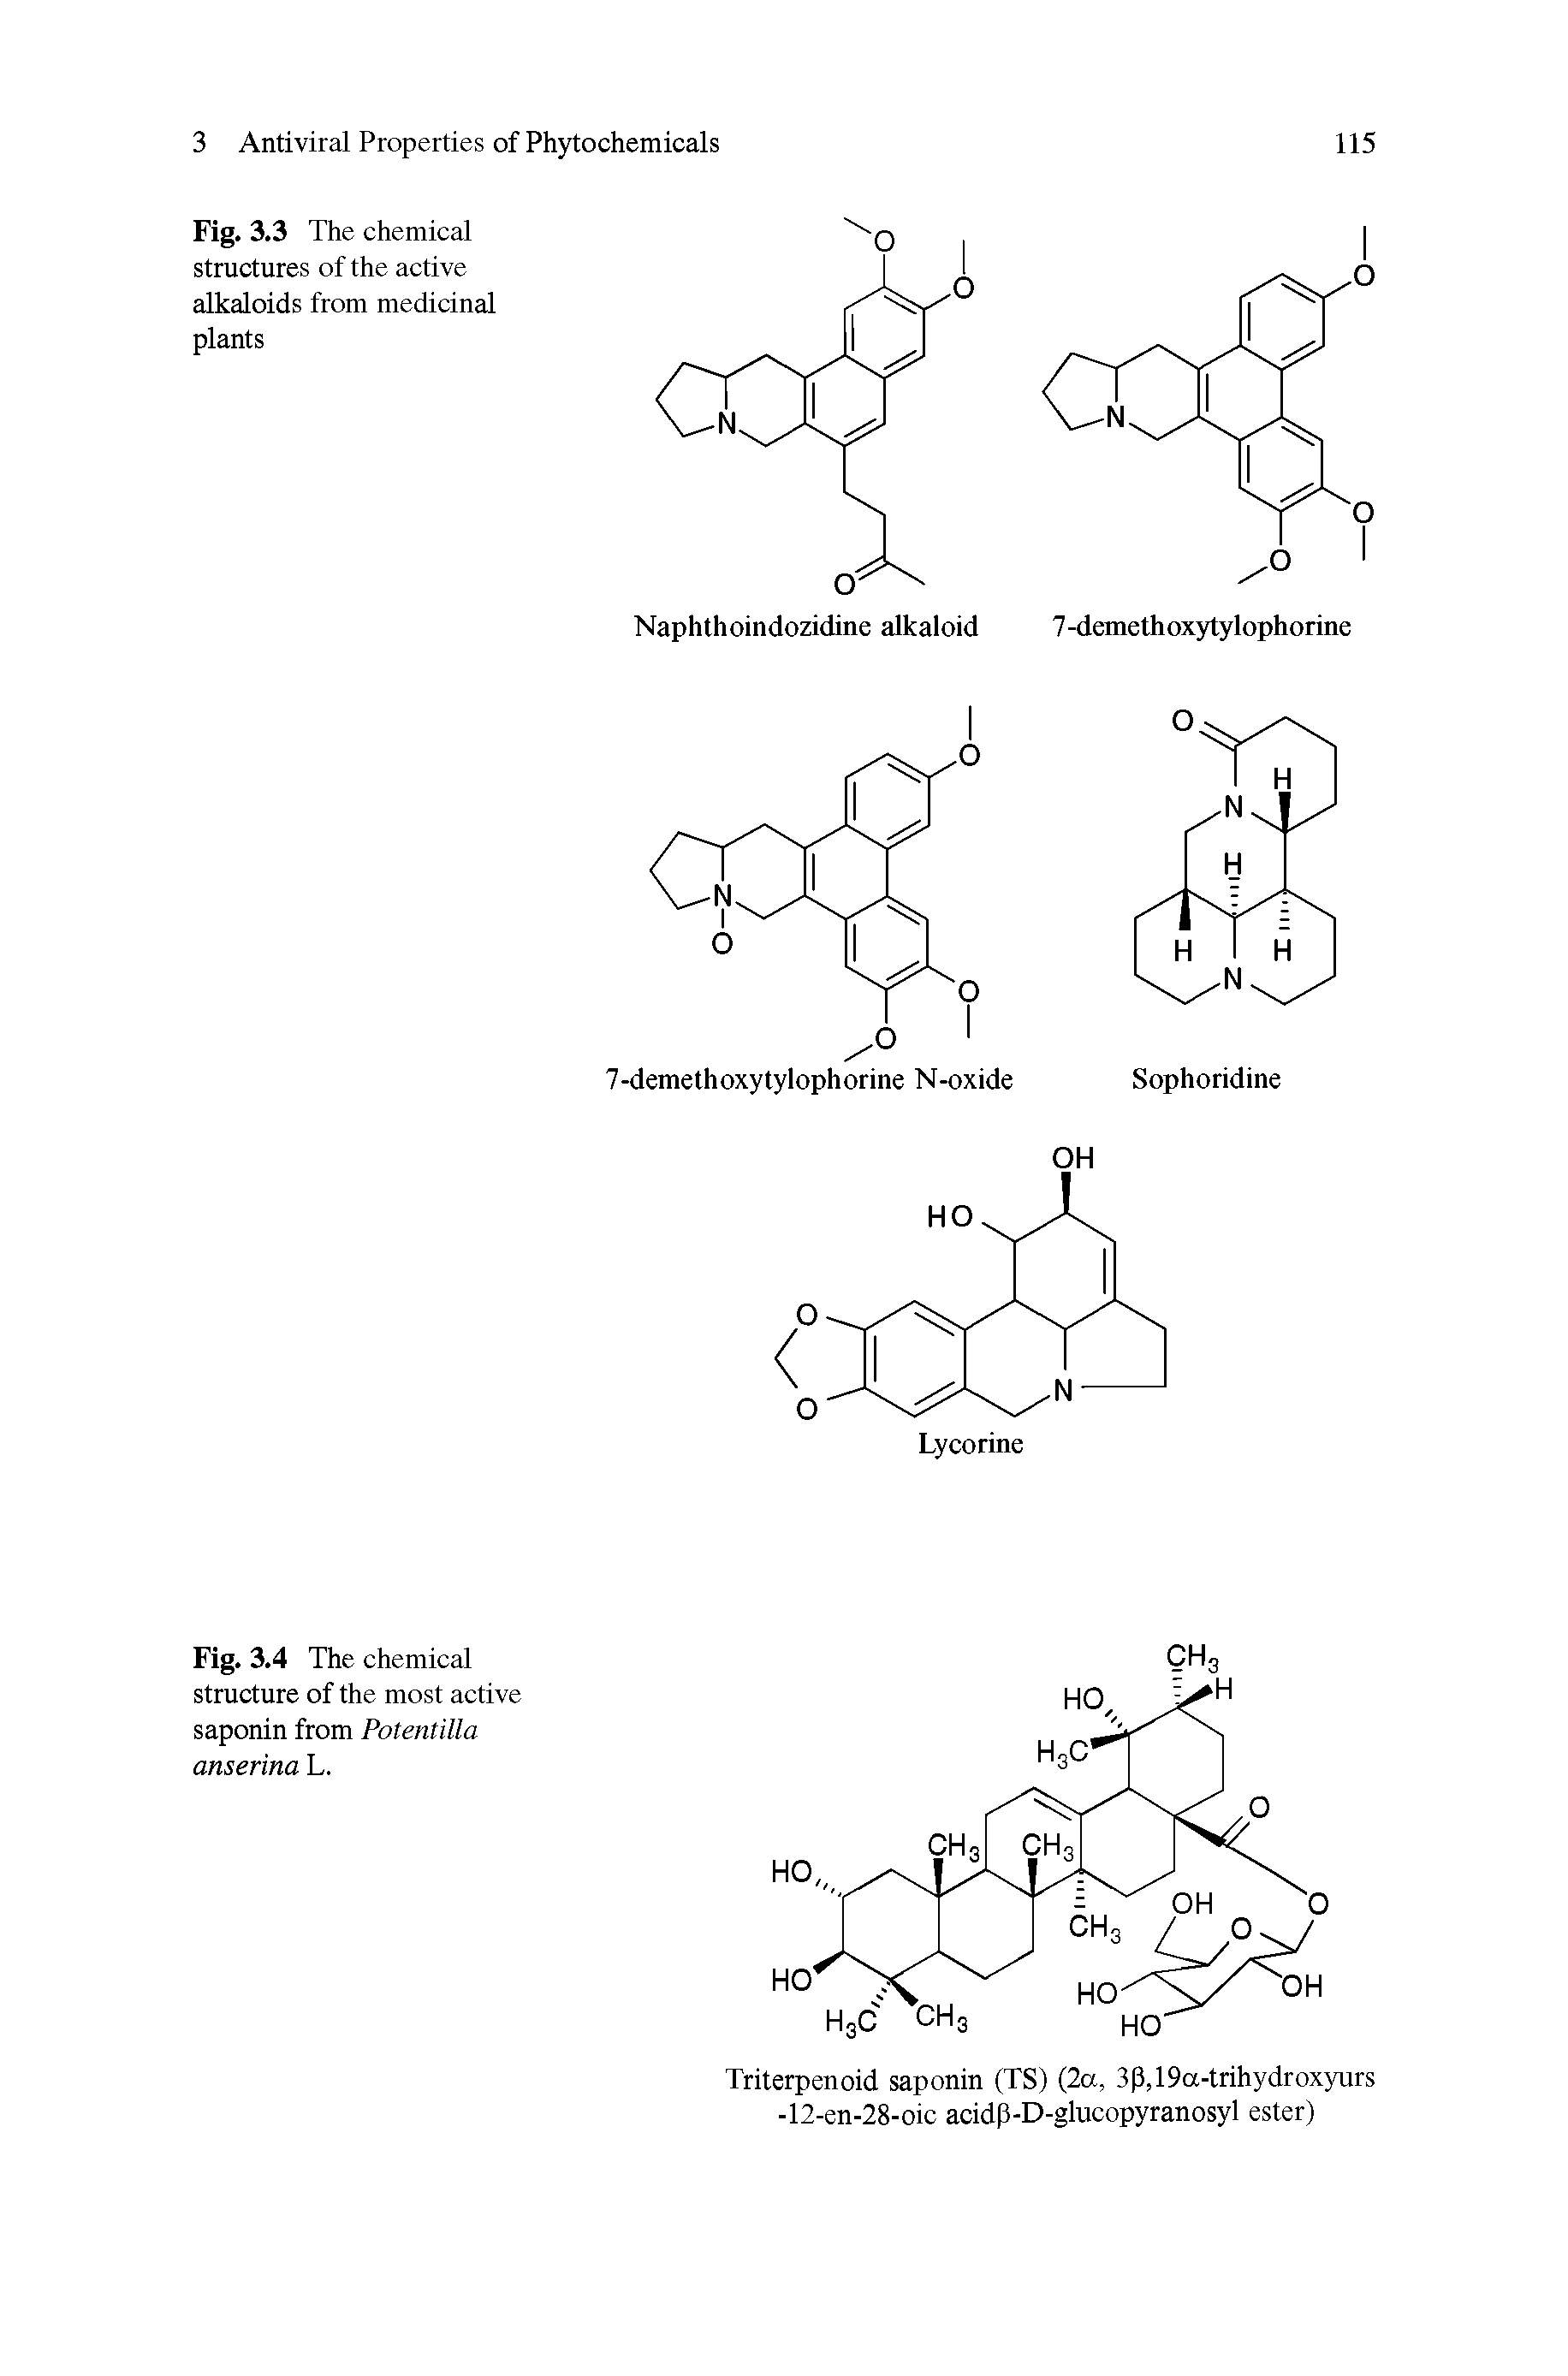 Fig. 3.4 The chemical structure of the most active saponin from Potentilla anserina L.